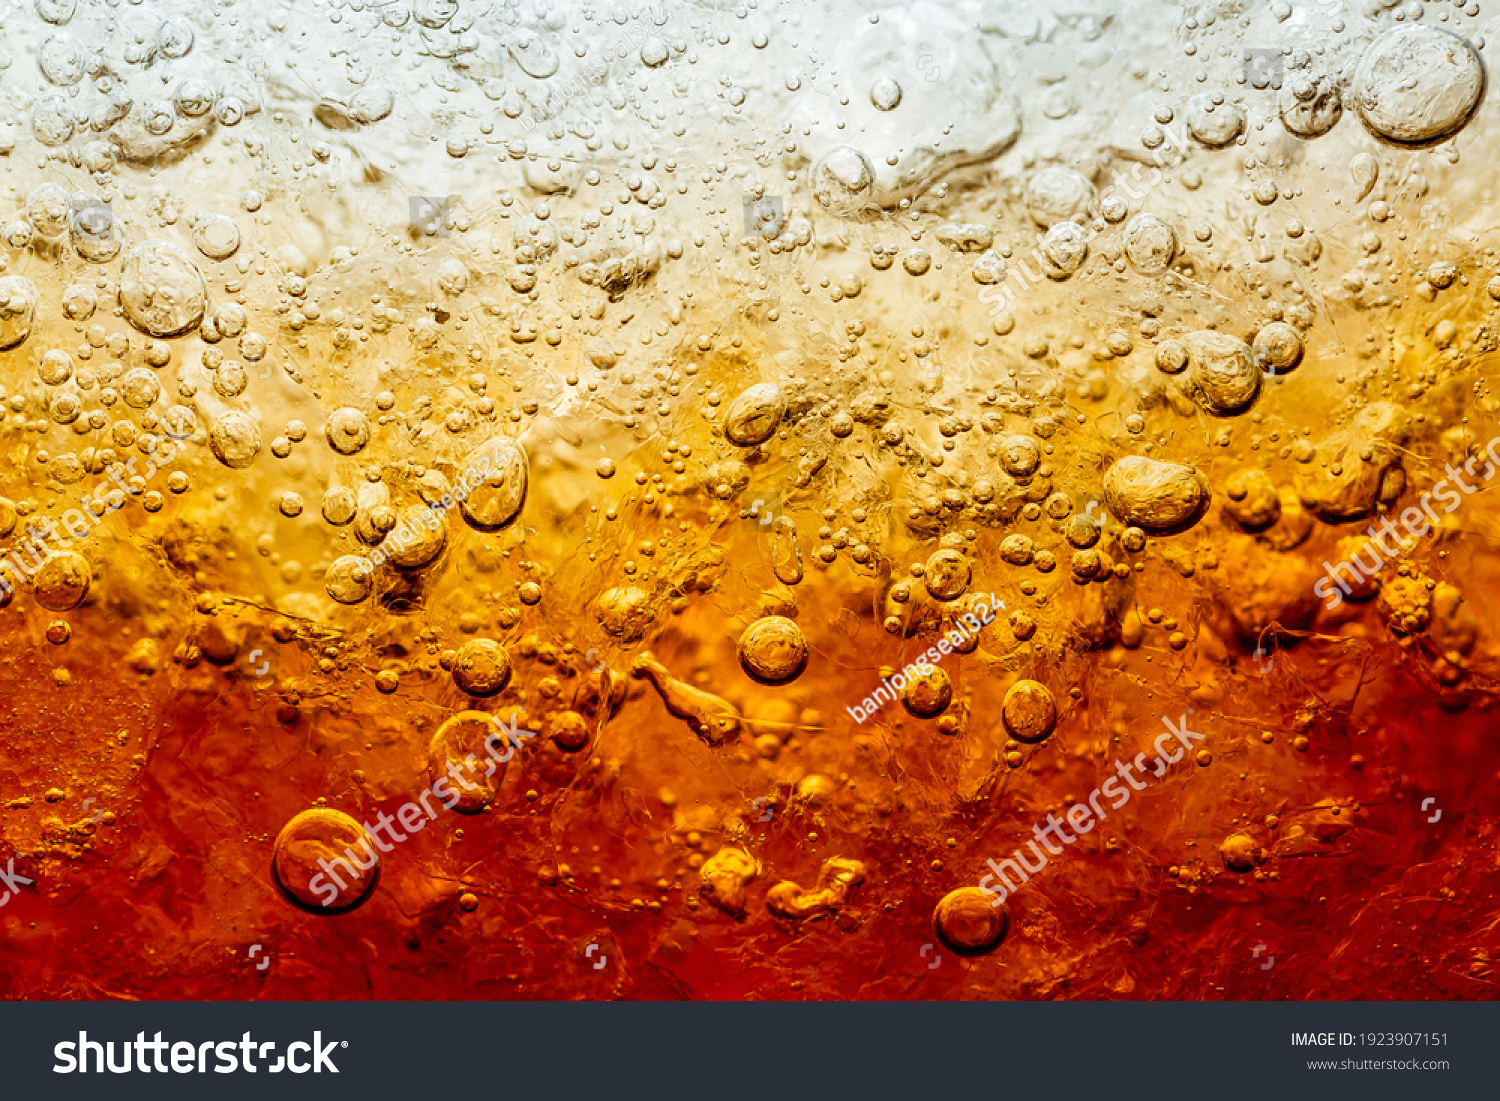 Cola with Ice. Food background ,Cola close-up ,design element. Beer bubbles macro,Ice, Bubble, Backgrounds, Ice Cube, Abstract Background #1923907151